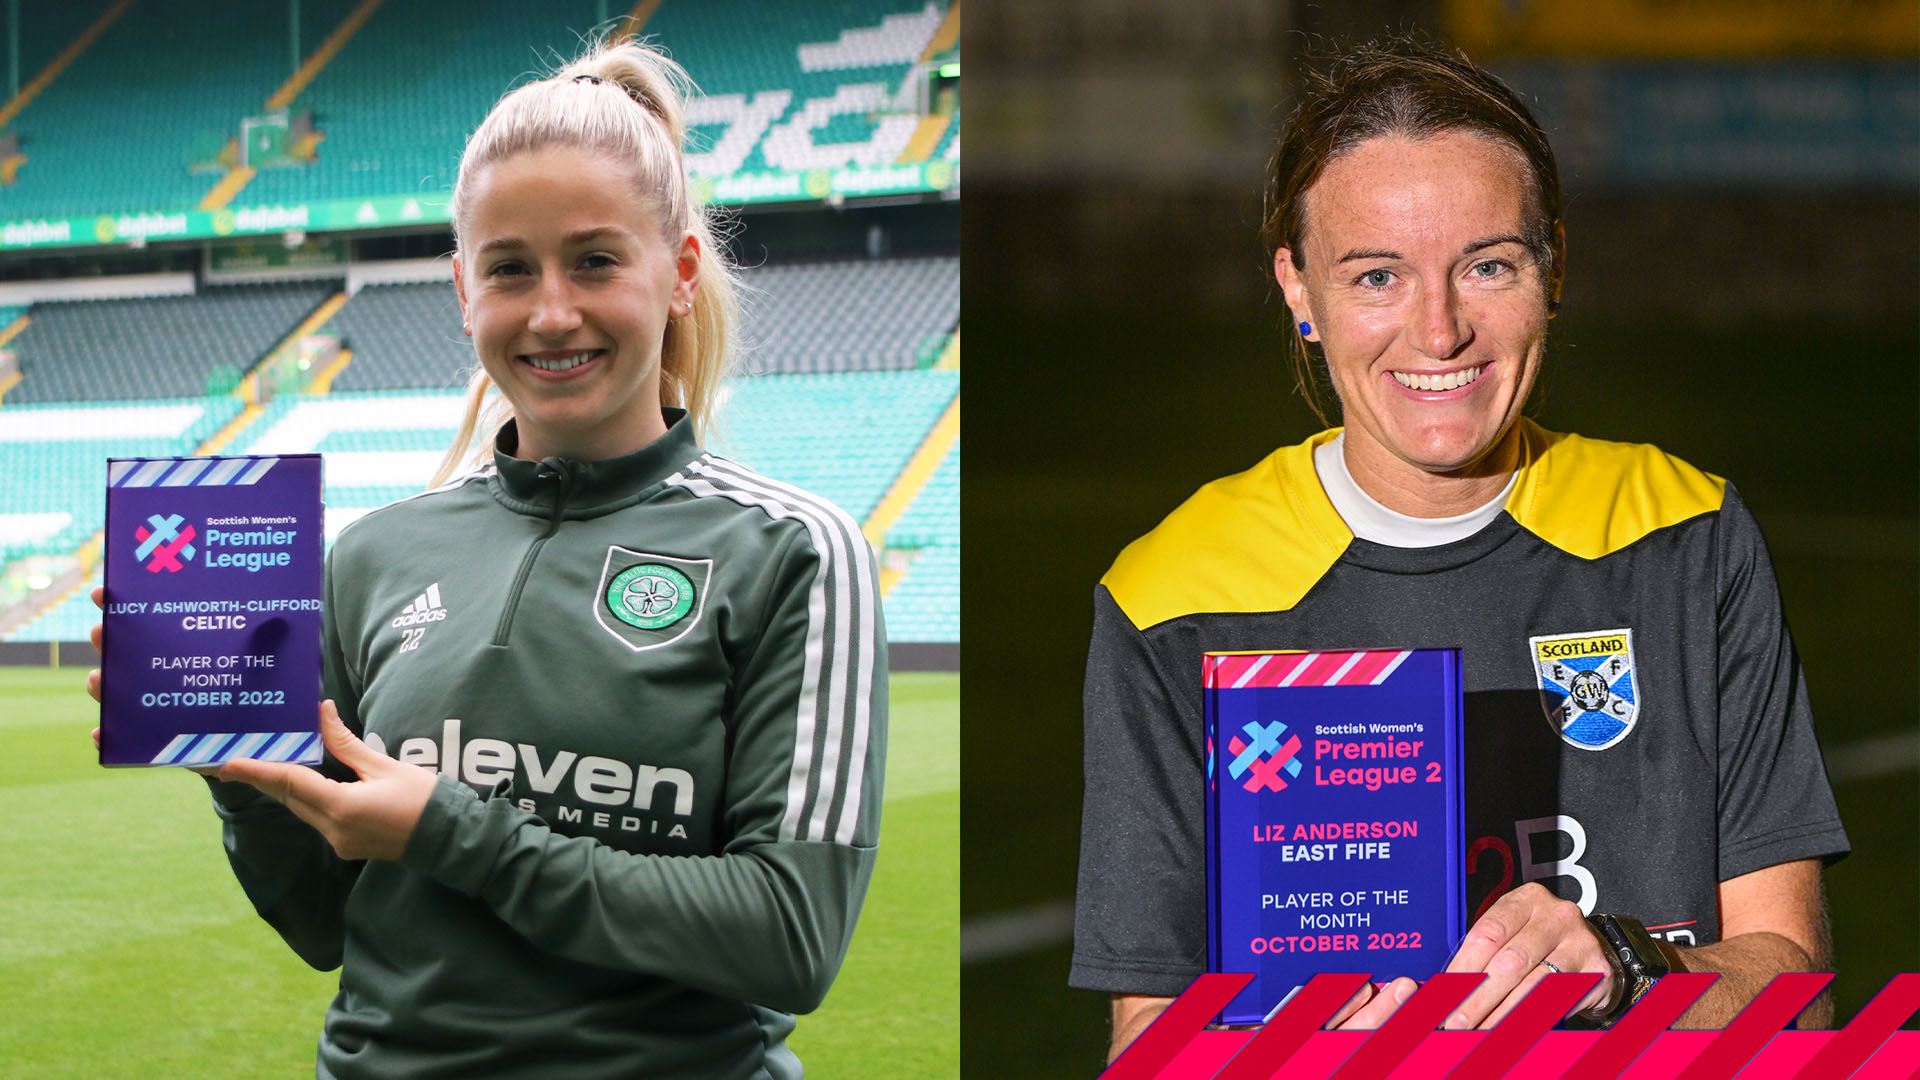 Celtic’s Ashworth-Clifford and East Fife’s Anderson win Player of the Month awards